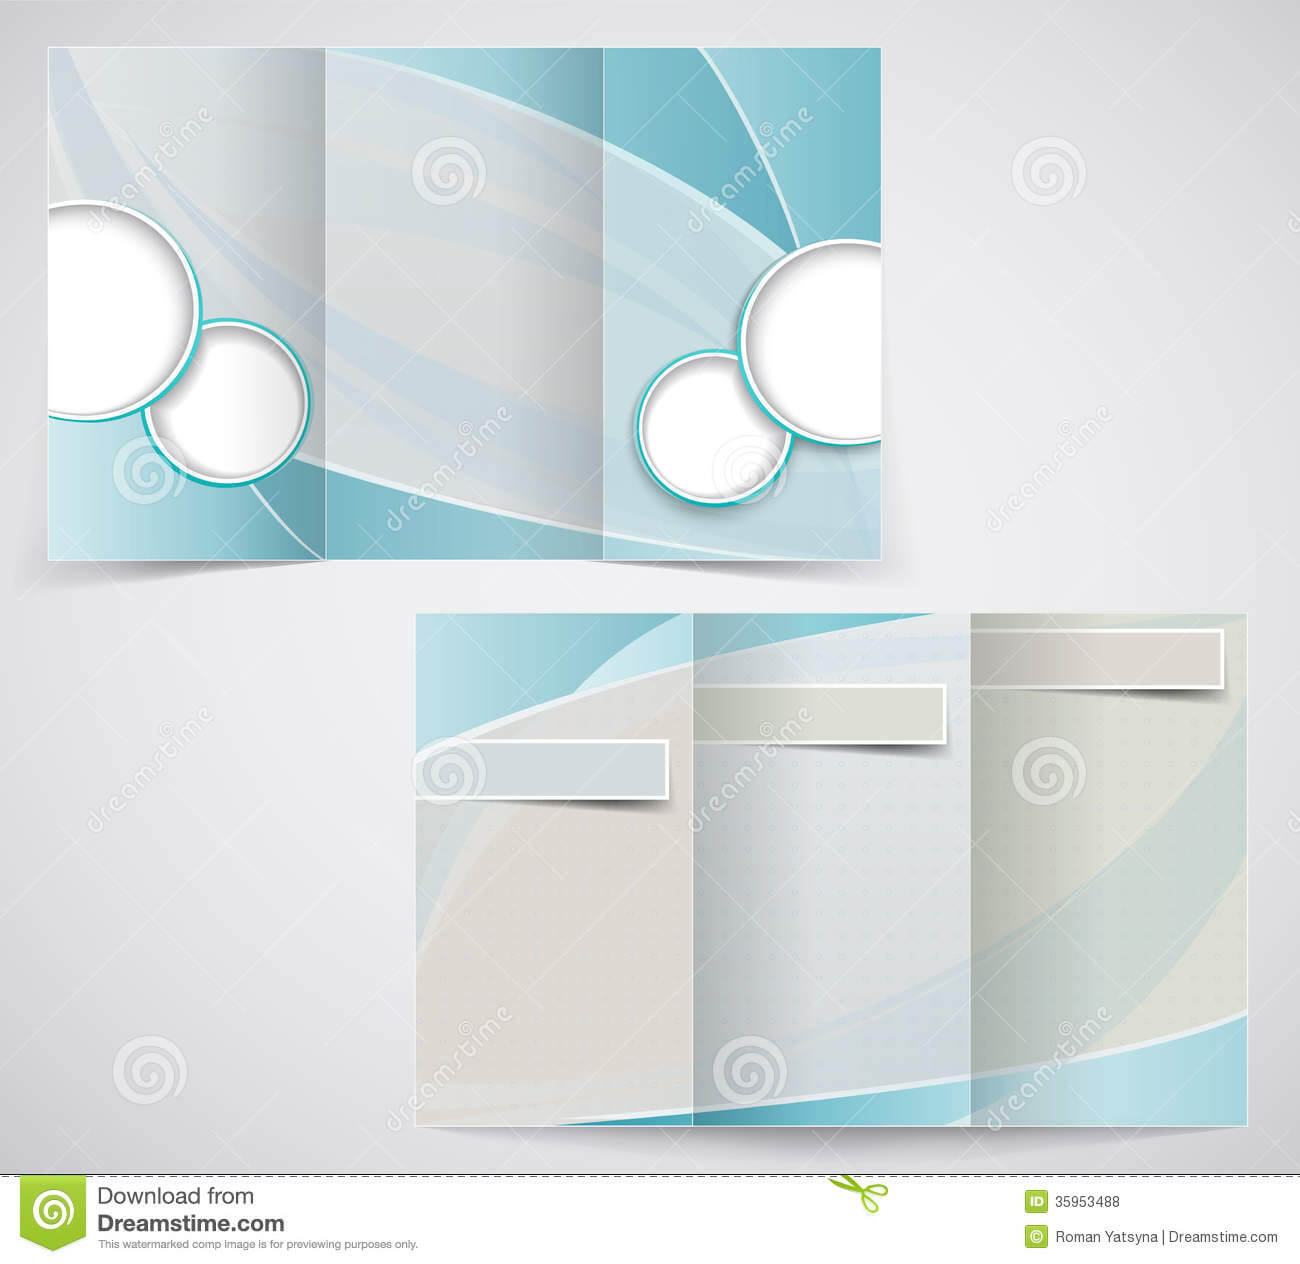 Tri Fold Business Brochure Template, Vector Blue D Stock With Regard To Brochure Template Illustrator Free Download